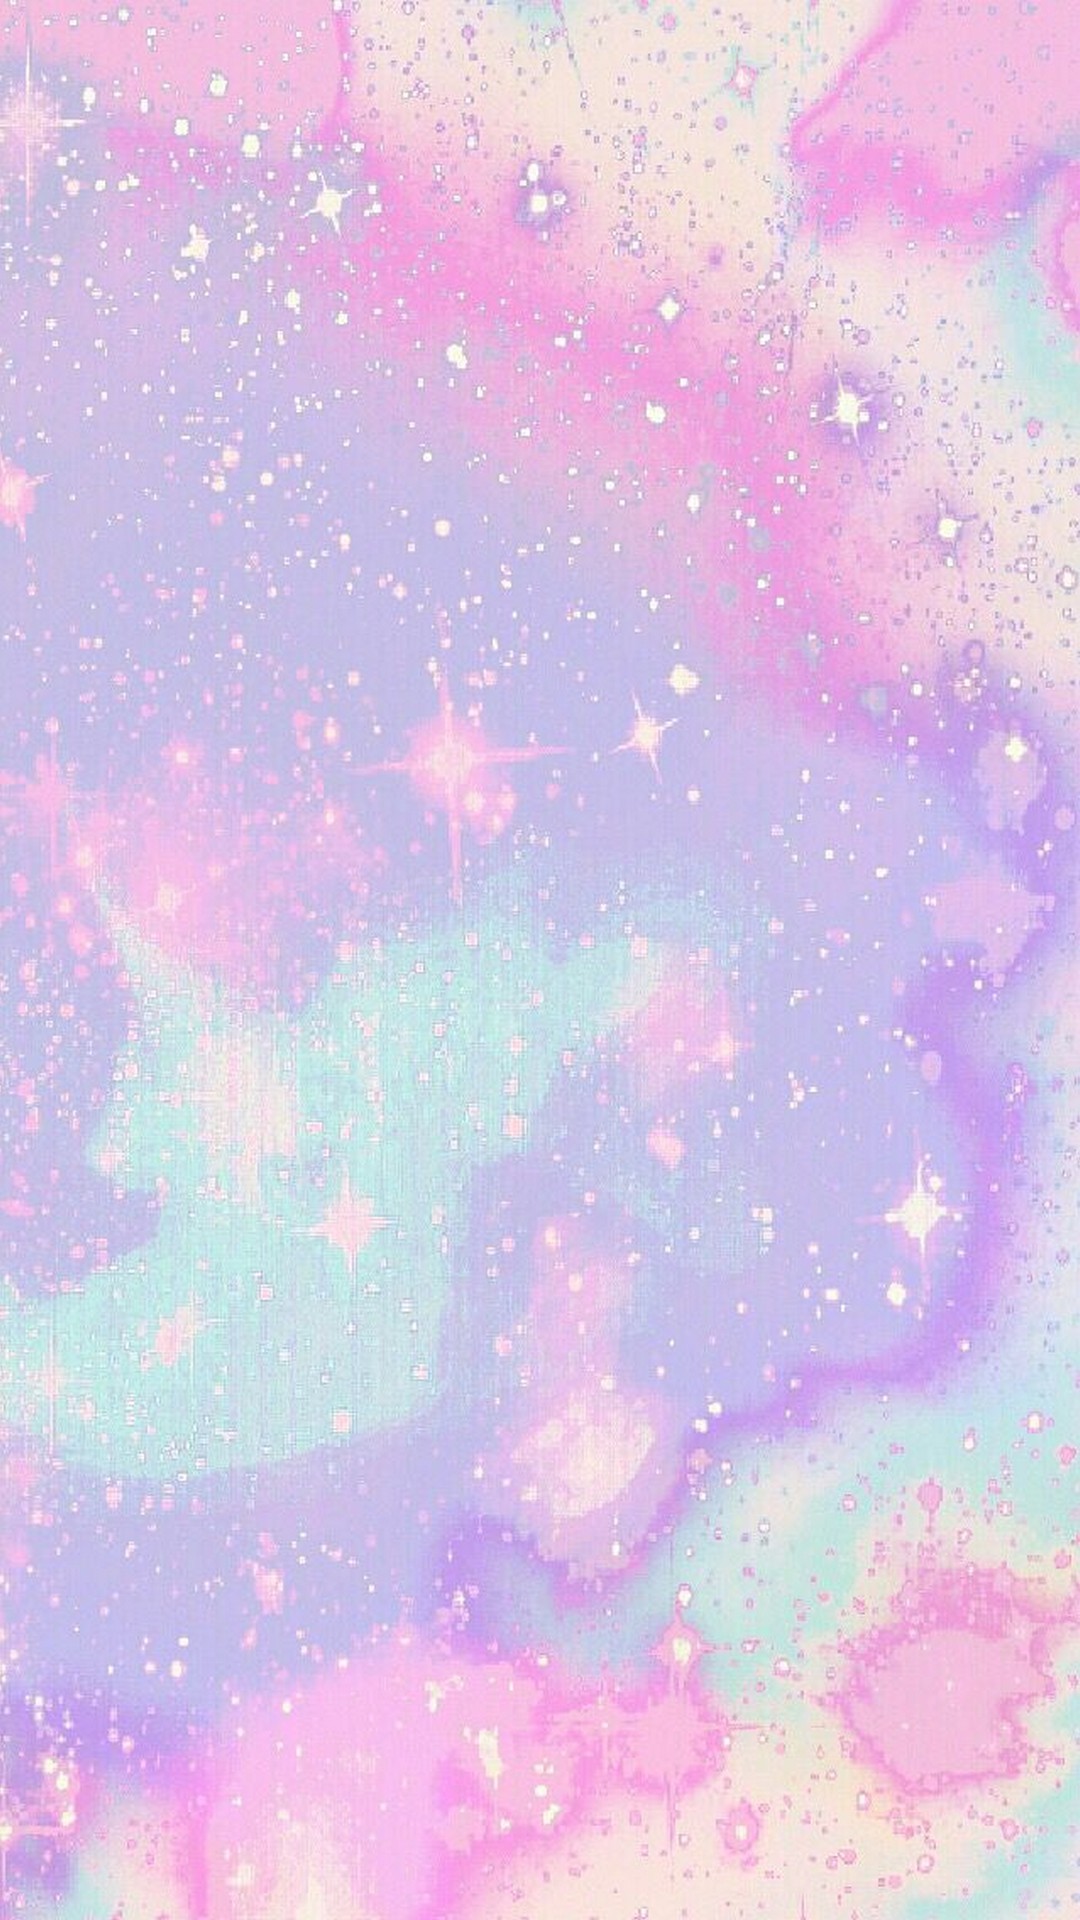 Cute Girly Wallpaper For Phone Hd With High-resolution - Pink Galaxy - HD Wallpaper 